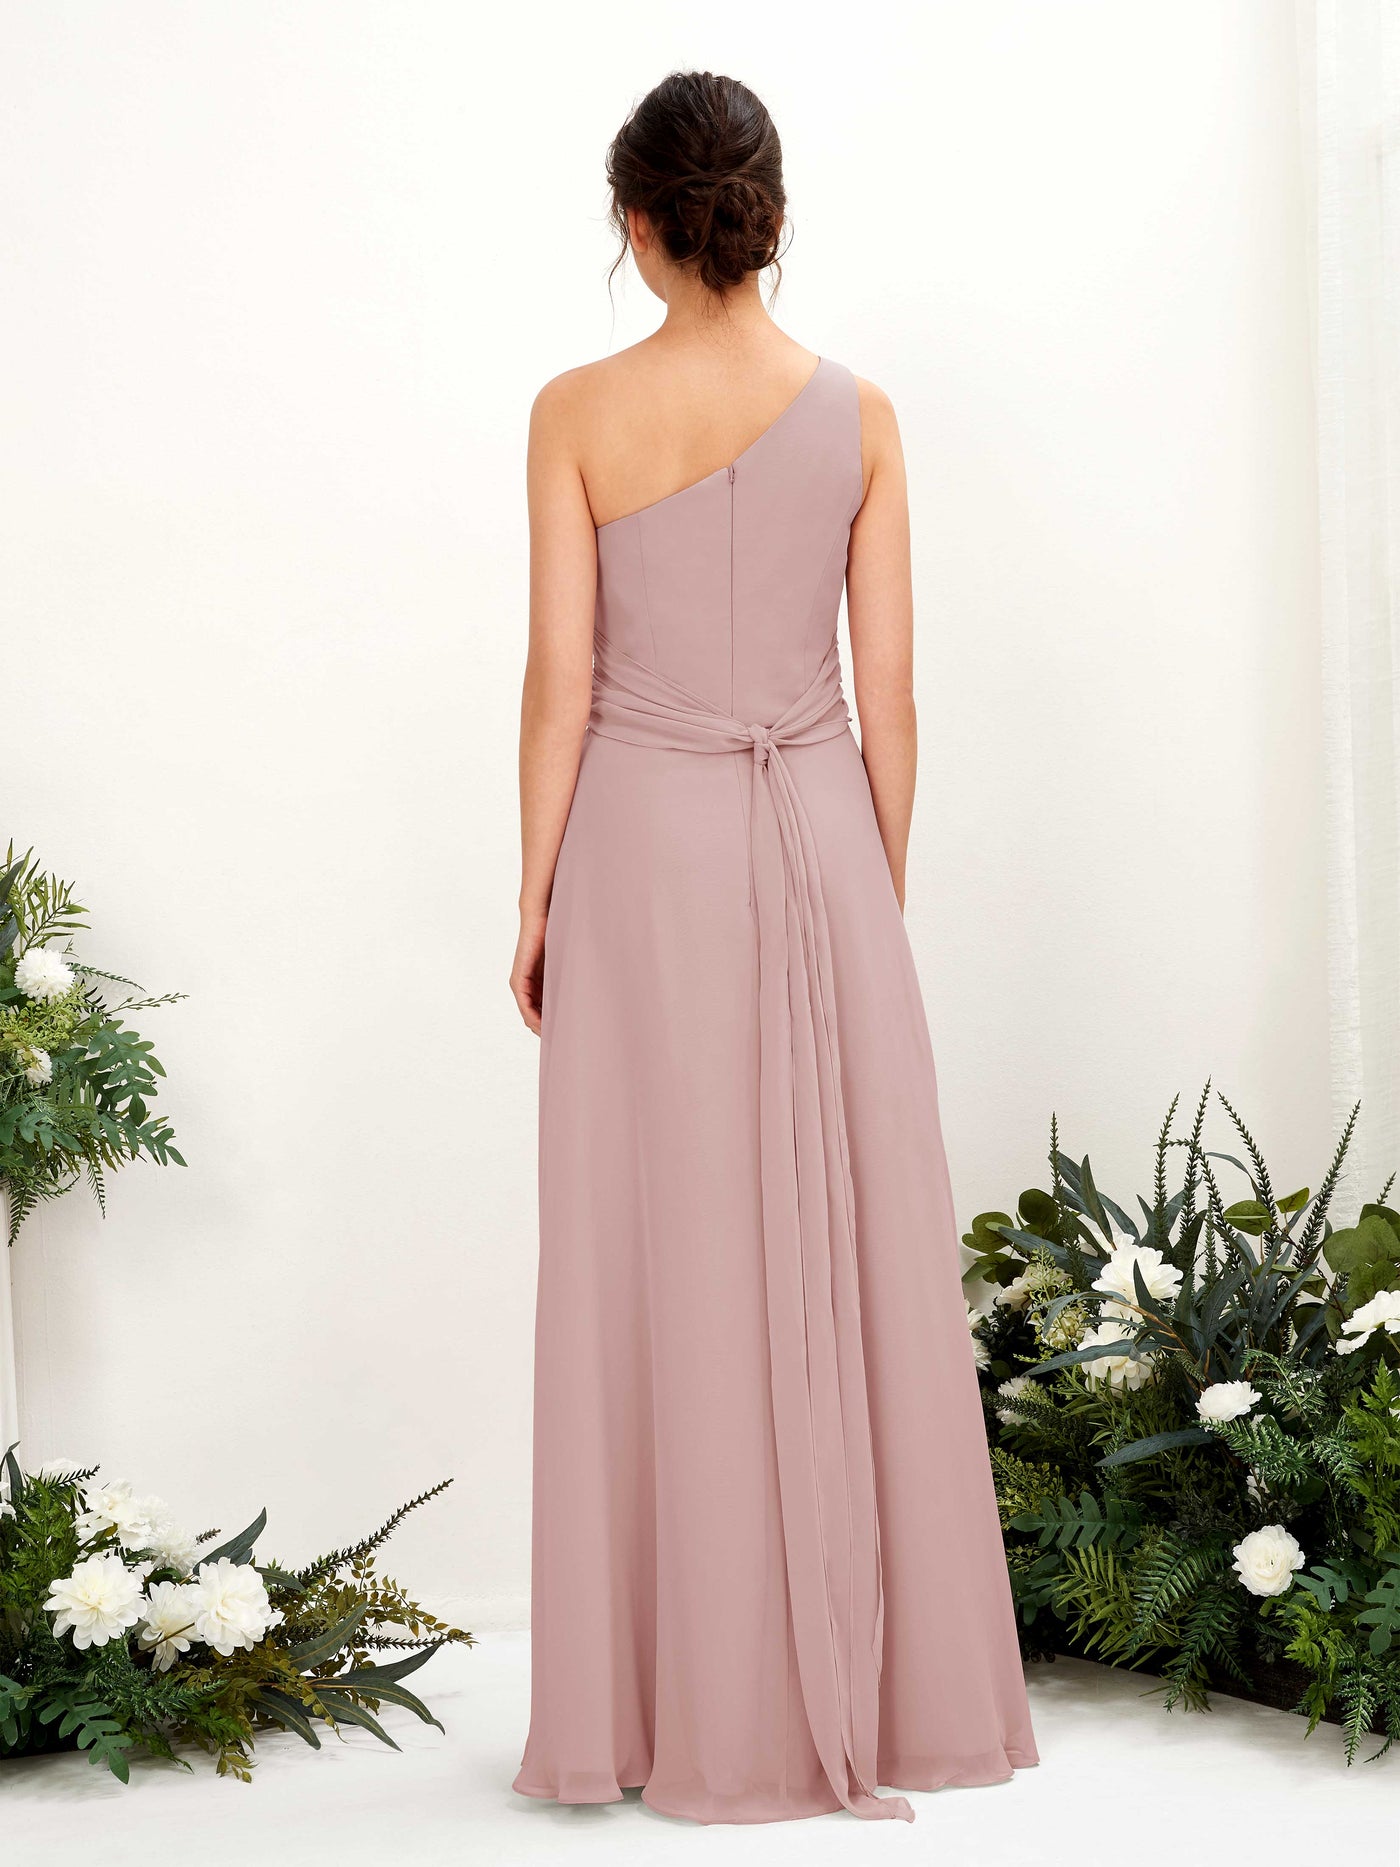 Dusty Rose Bridesmaid Dresses Bridesmaid Dress A-line Chiffon One Shoulder Full Length Sleeveless Wedding Party Dress (81224709)#color_dusty-rose